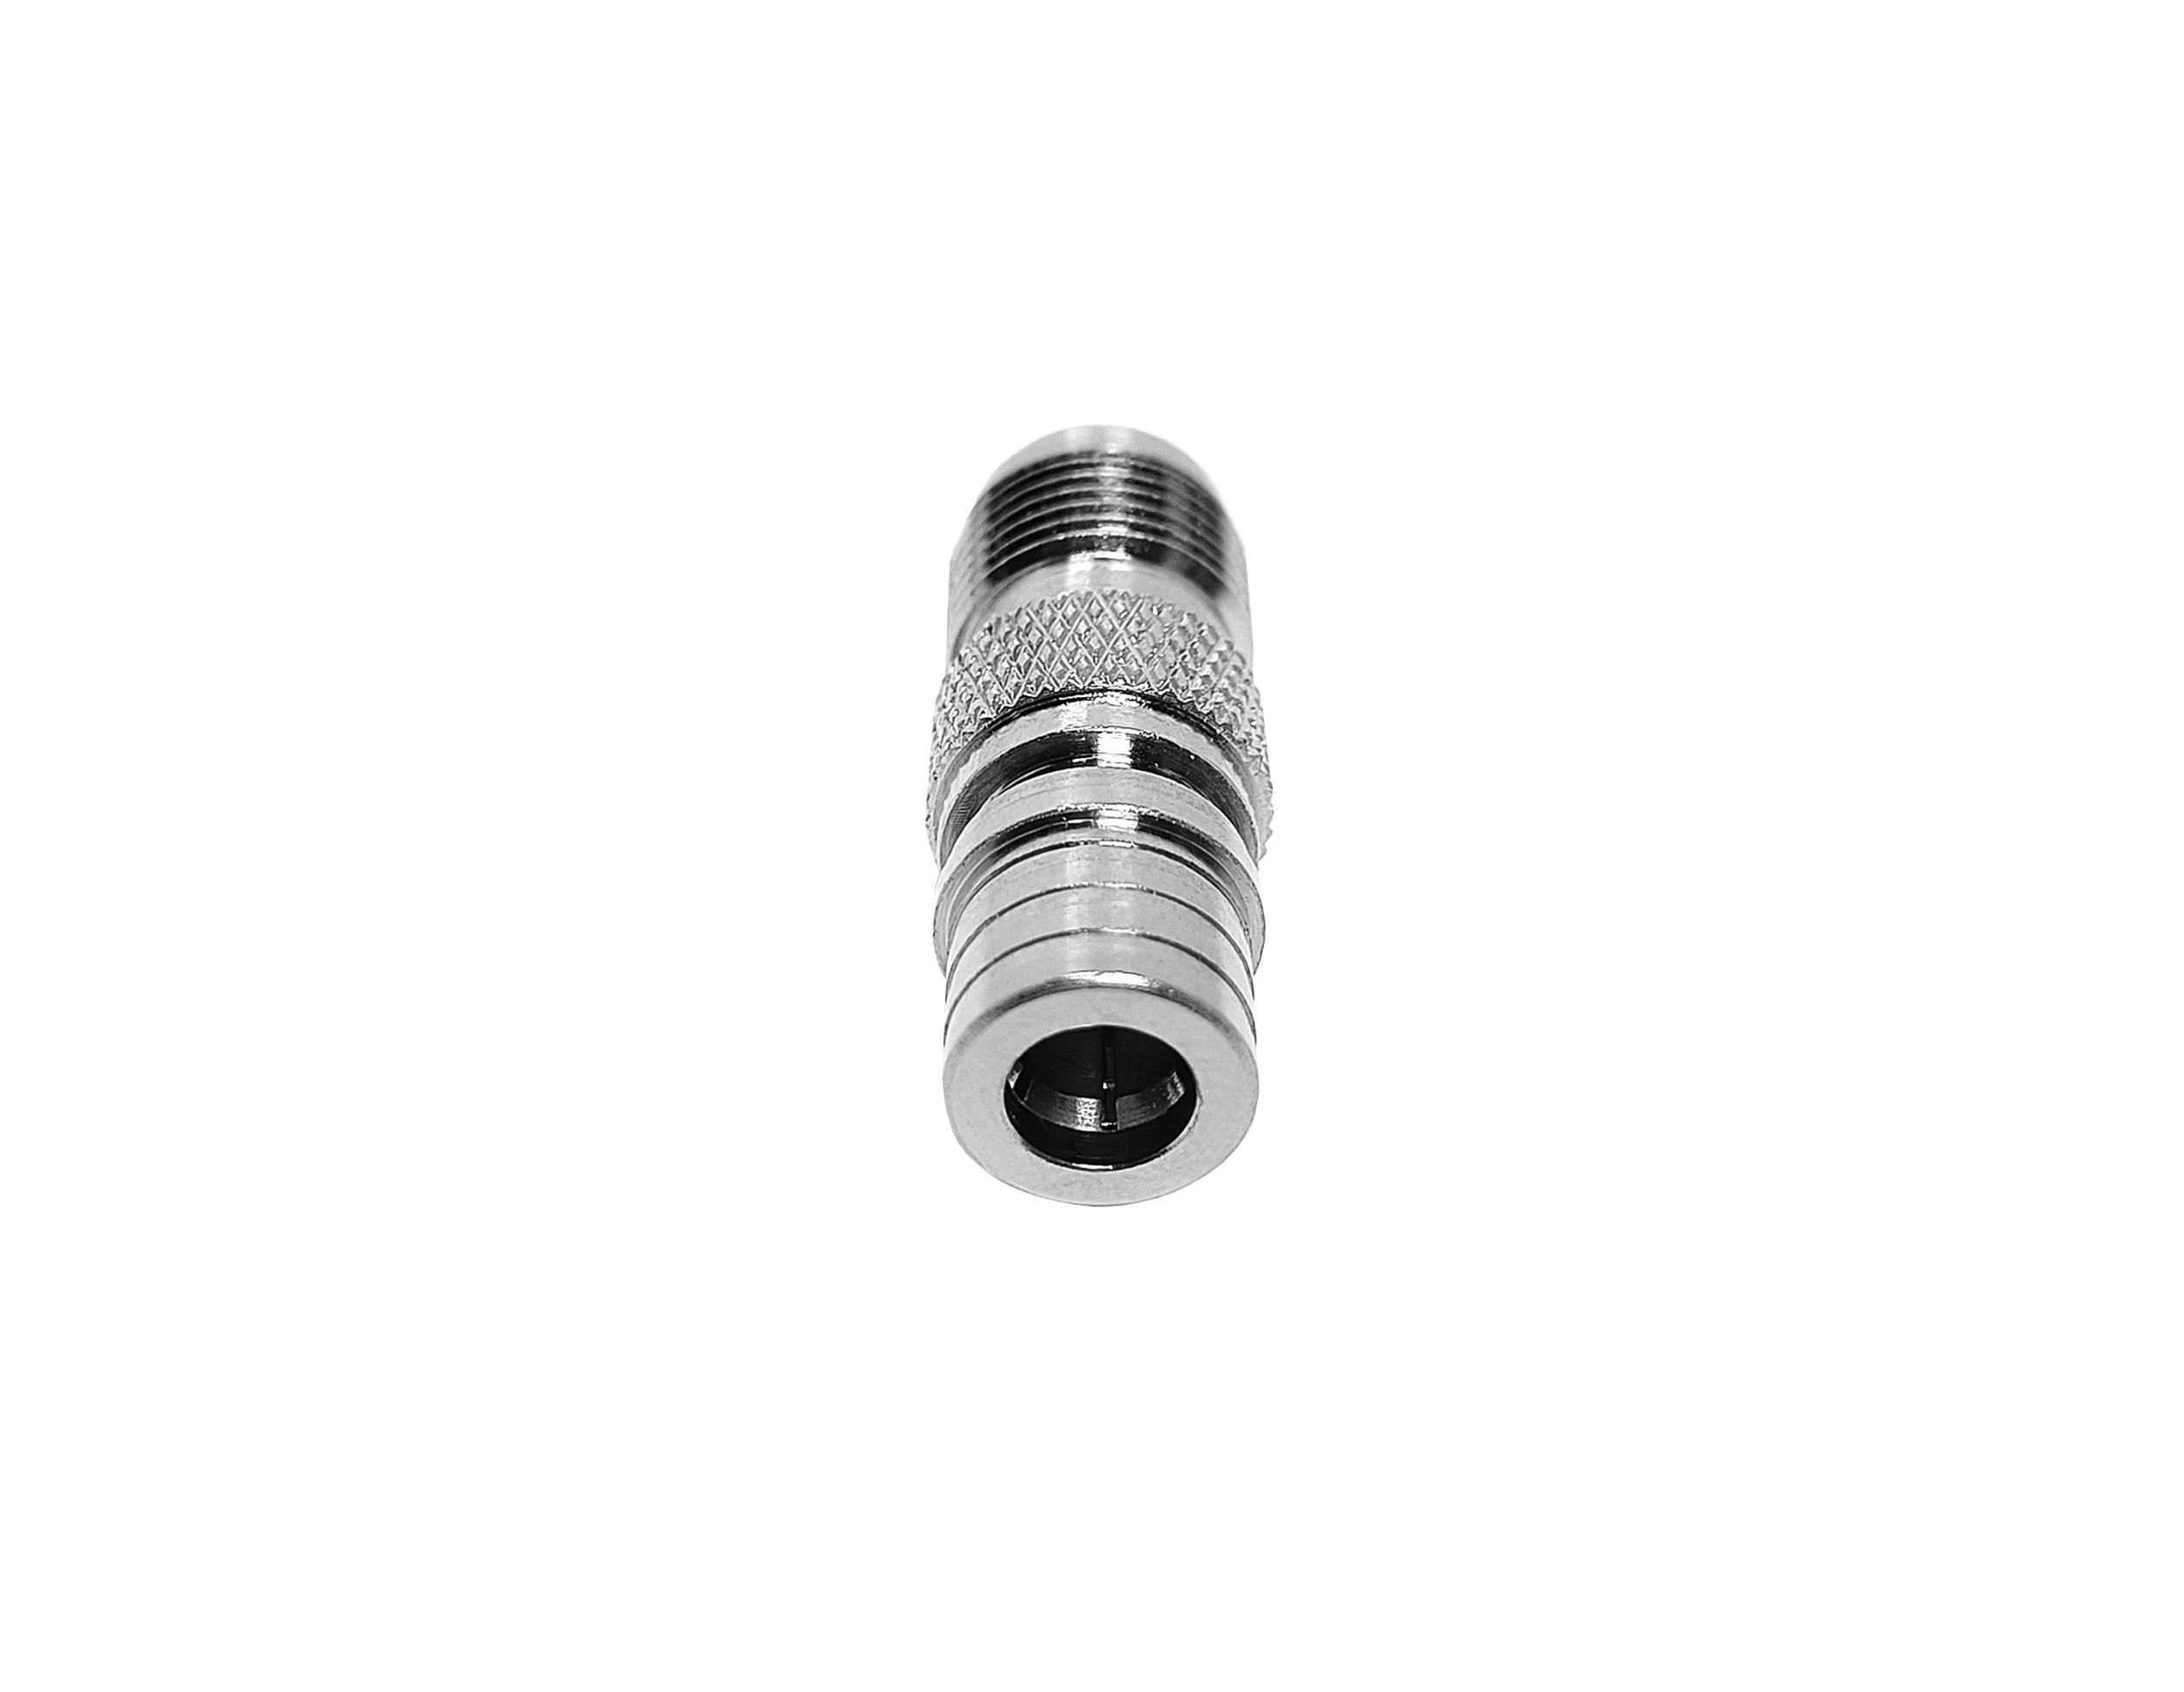 Factory supply RF Coaxial Adapter TNC Female Jack Connector to QMA Male Plug Connector Adapter Coax Connector details